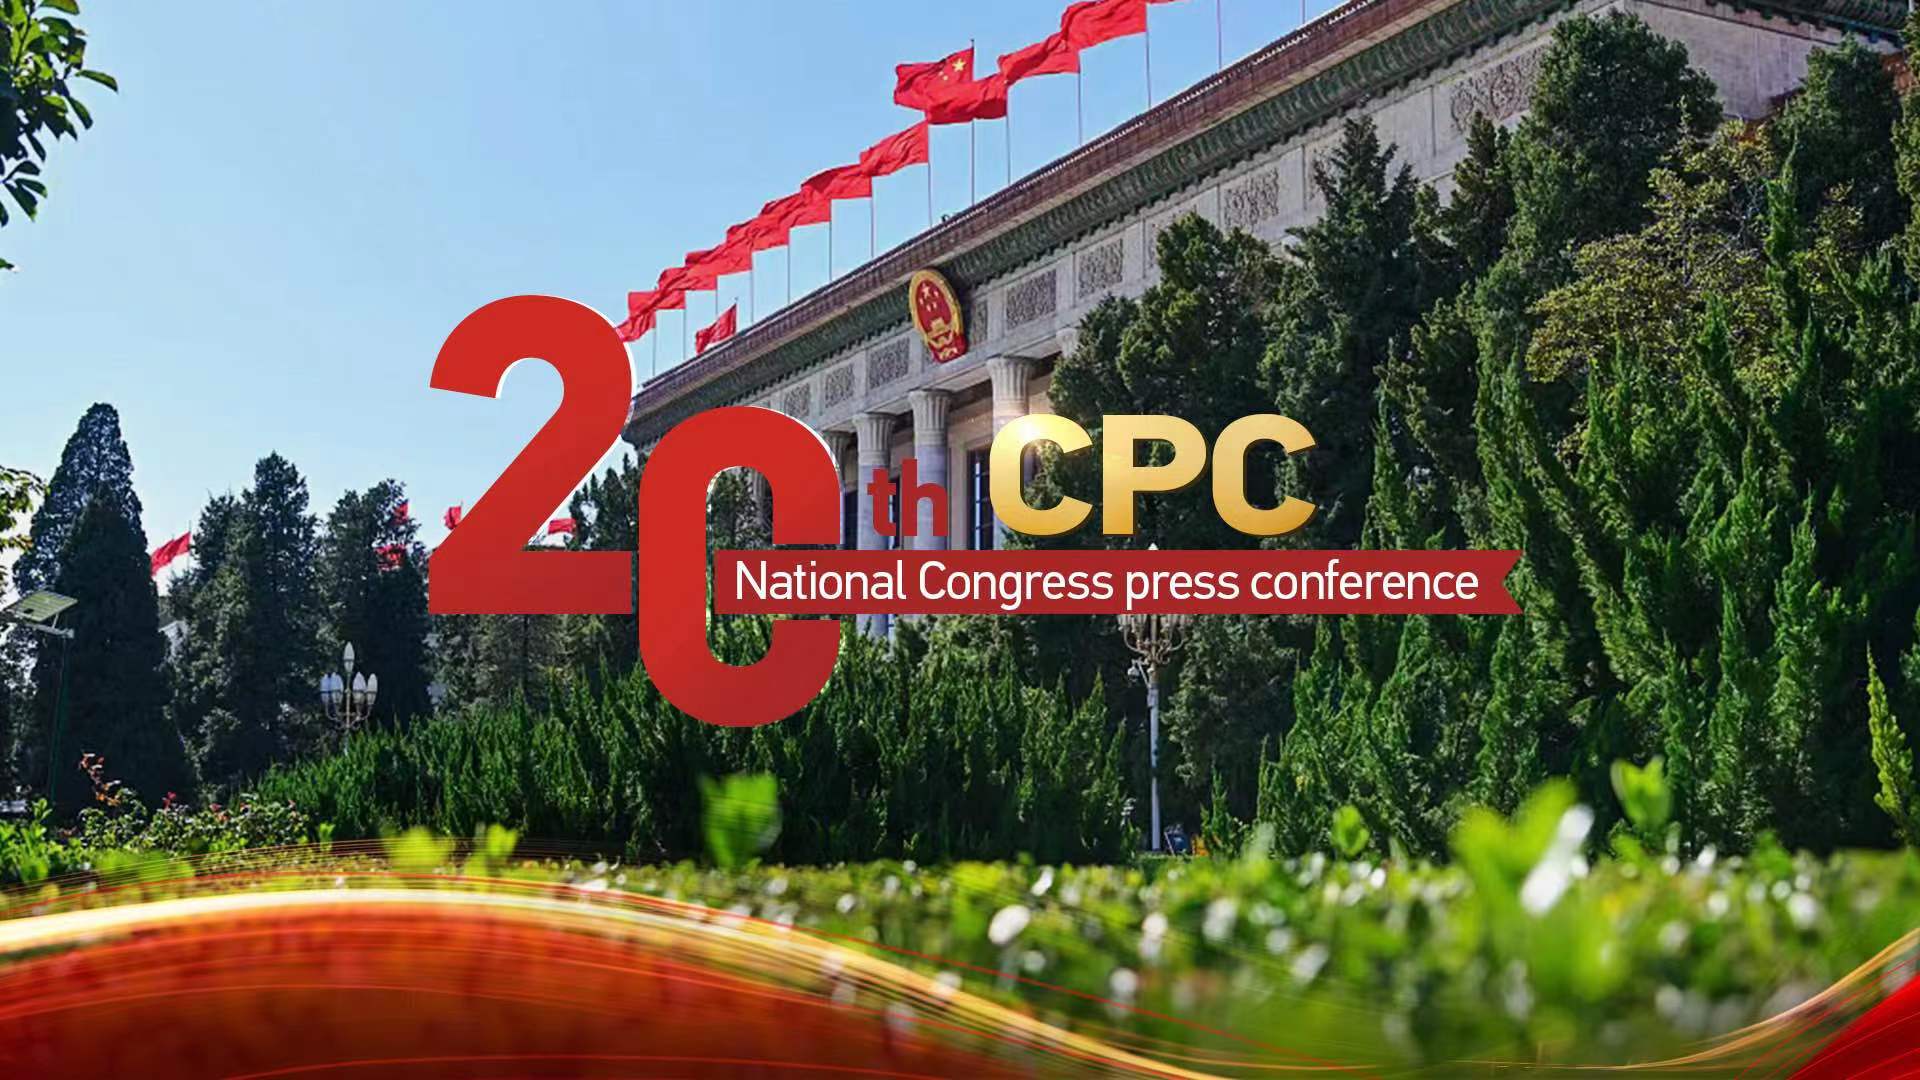 Live: Press Center for 20th CPC National Congress hosts its fourth press conference